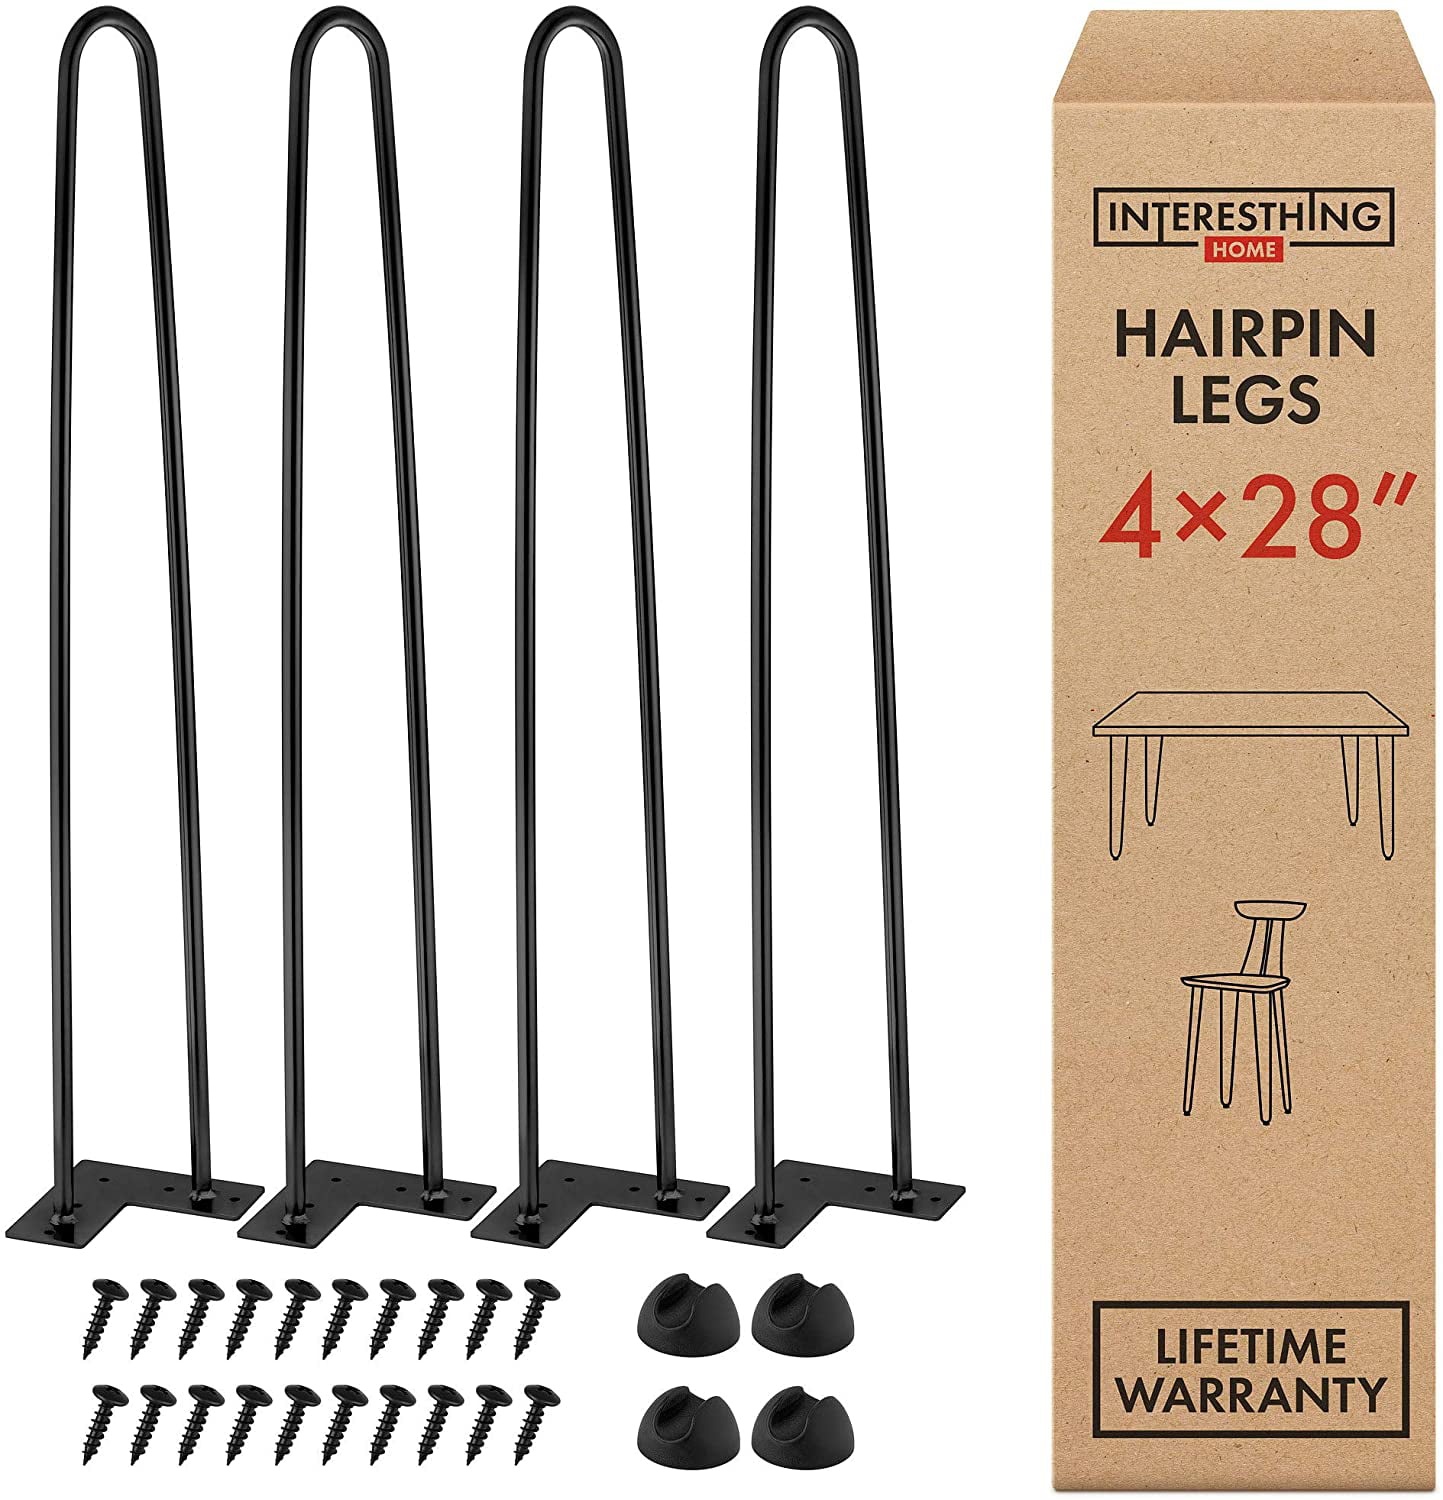 Details about   28" Hairpin Legs Metal Heavy Duty Furniture Leg Coffee Table By Interesting Home 